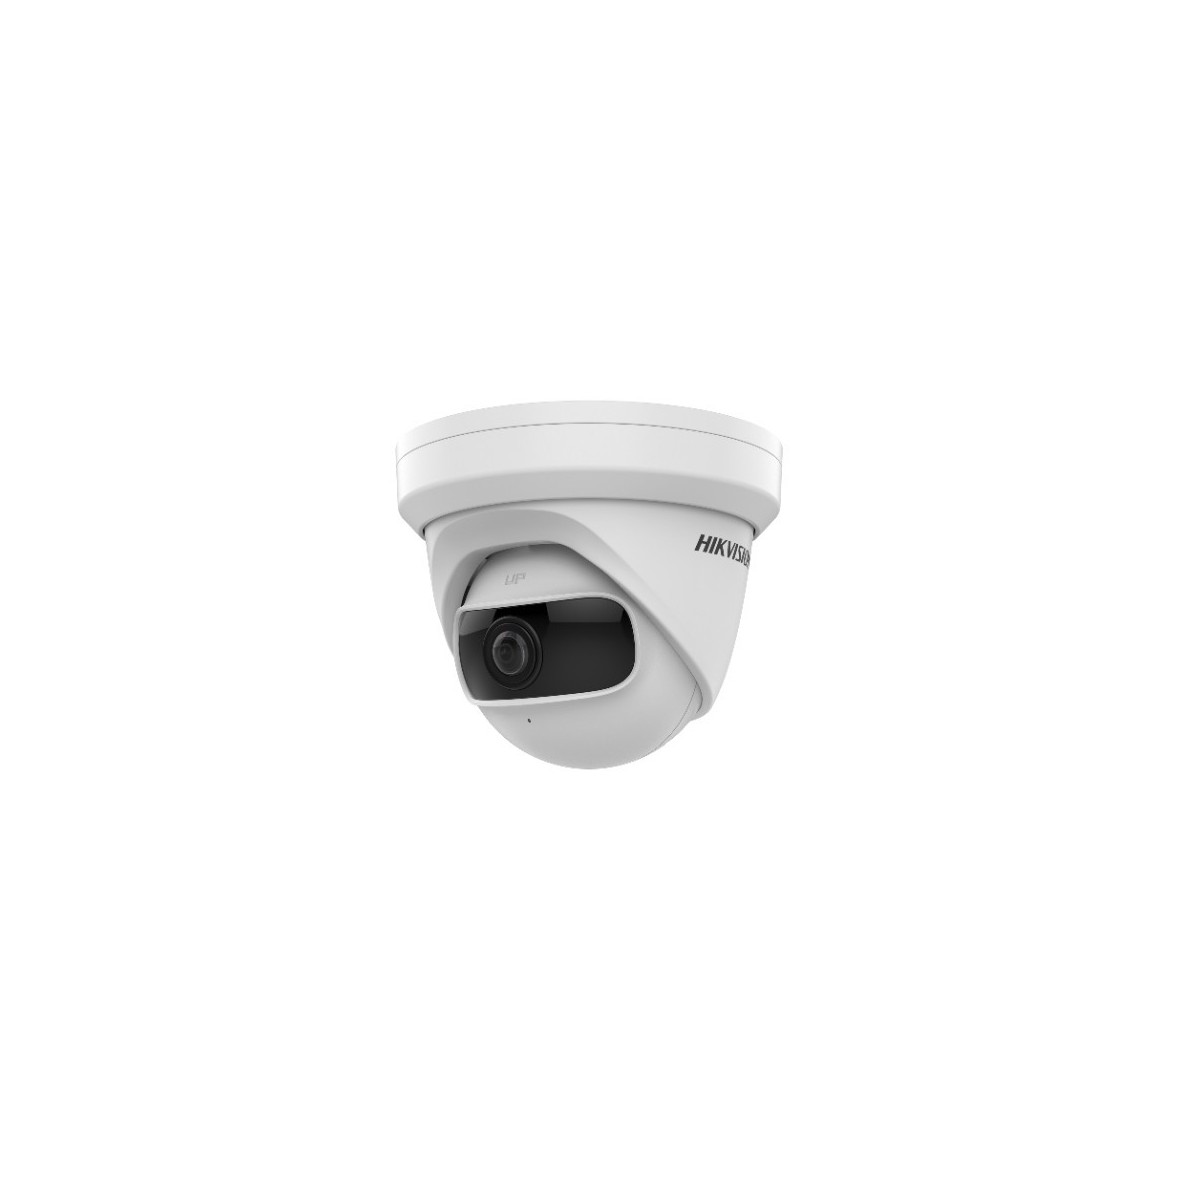 Hikvision Digital Technology DS-2CD2345G0P-I - IP security camera - Indoor - Wired - Bulgarian - Traditional Chinese - Czech - D